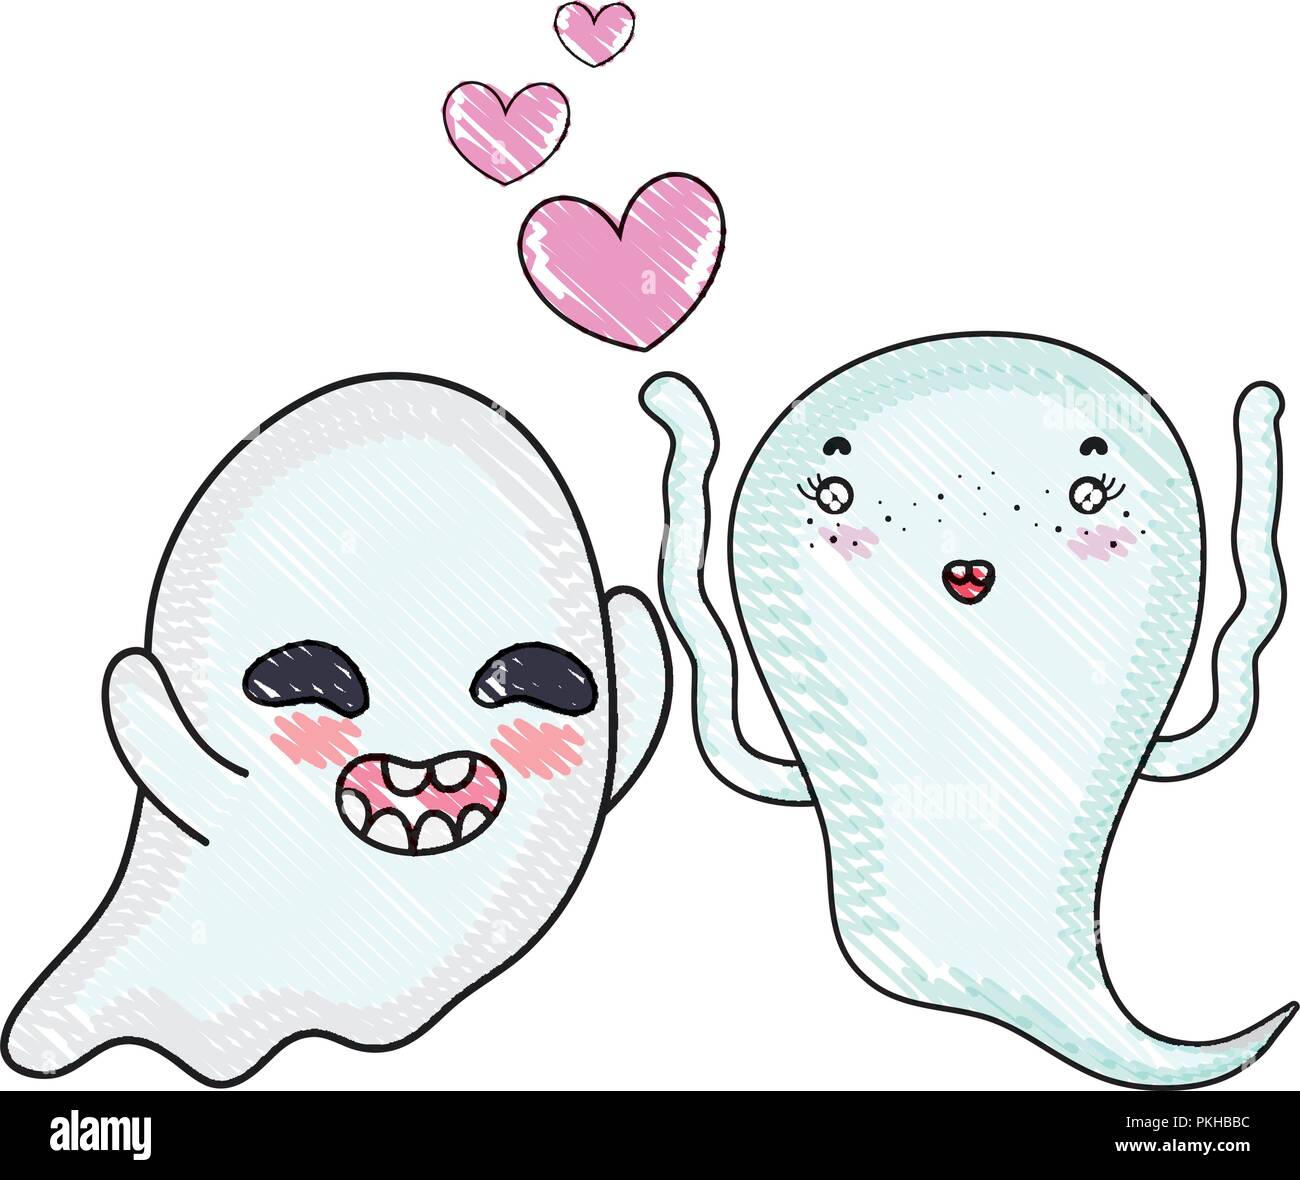 grated funny ghost couple character with hearts Stock Vector Image ...